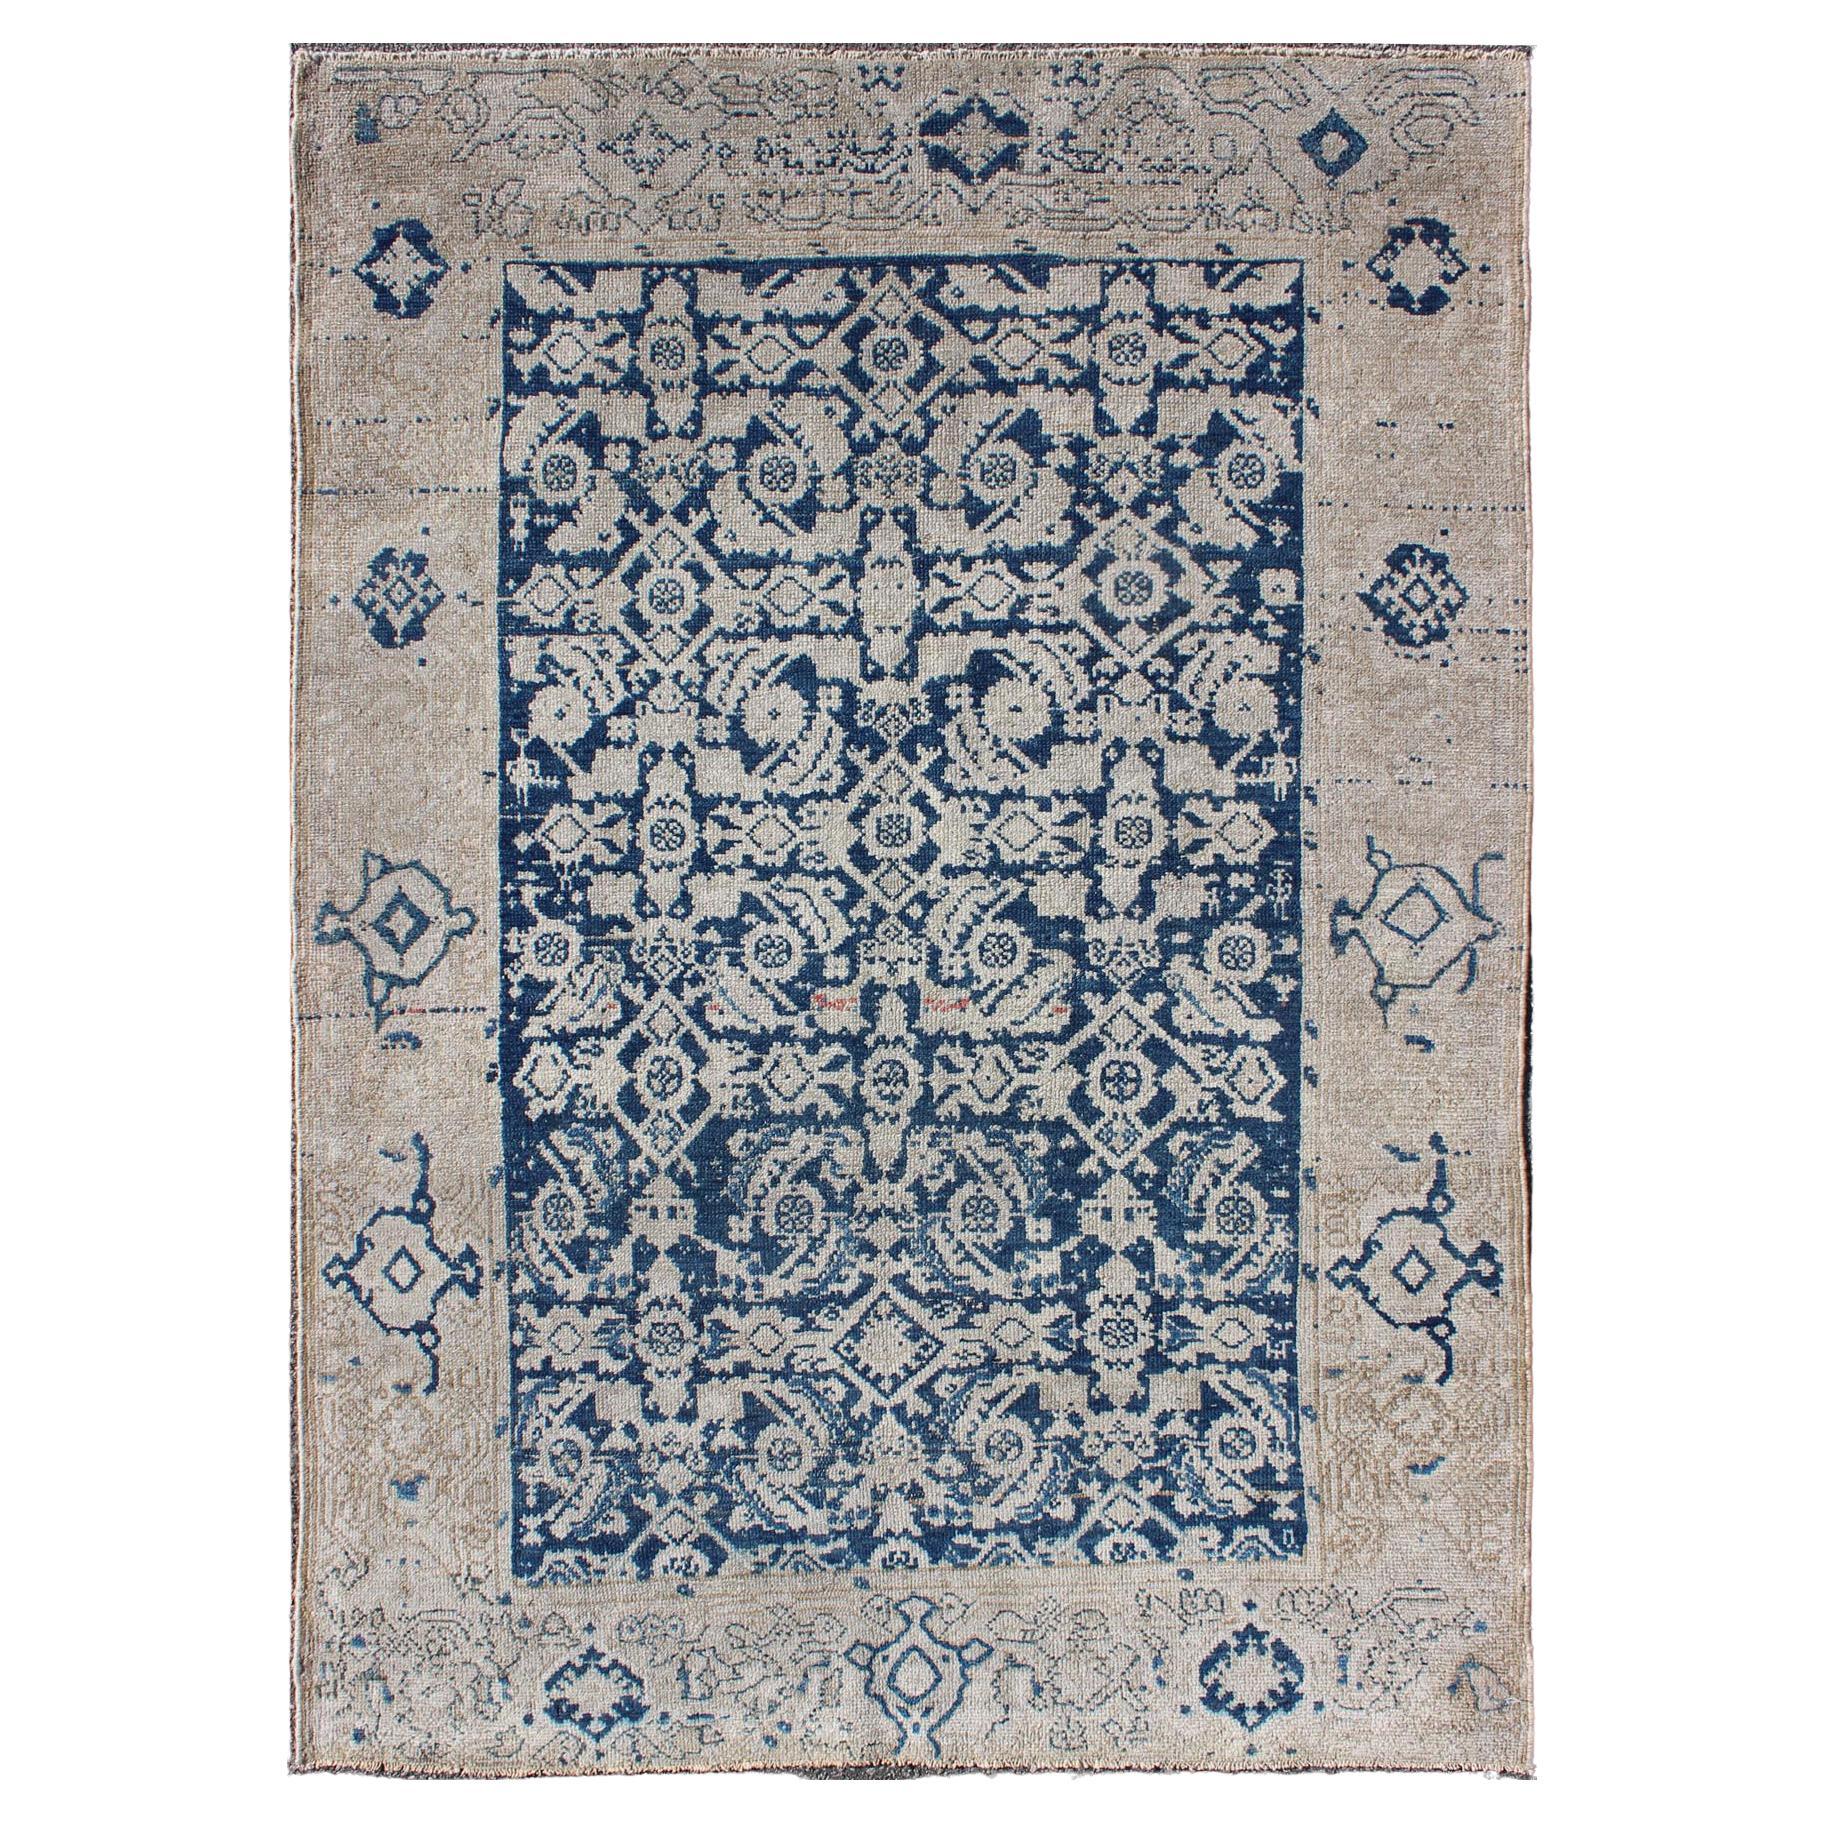  Antique Persian Distressed Malayer Rug with All-Over Herati Design in Navy Blue